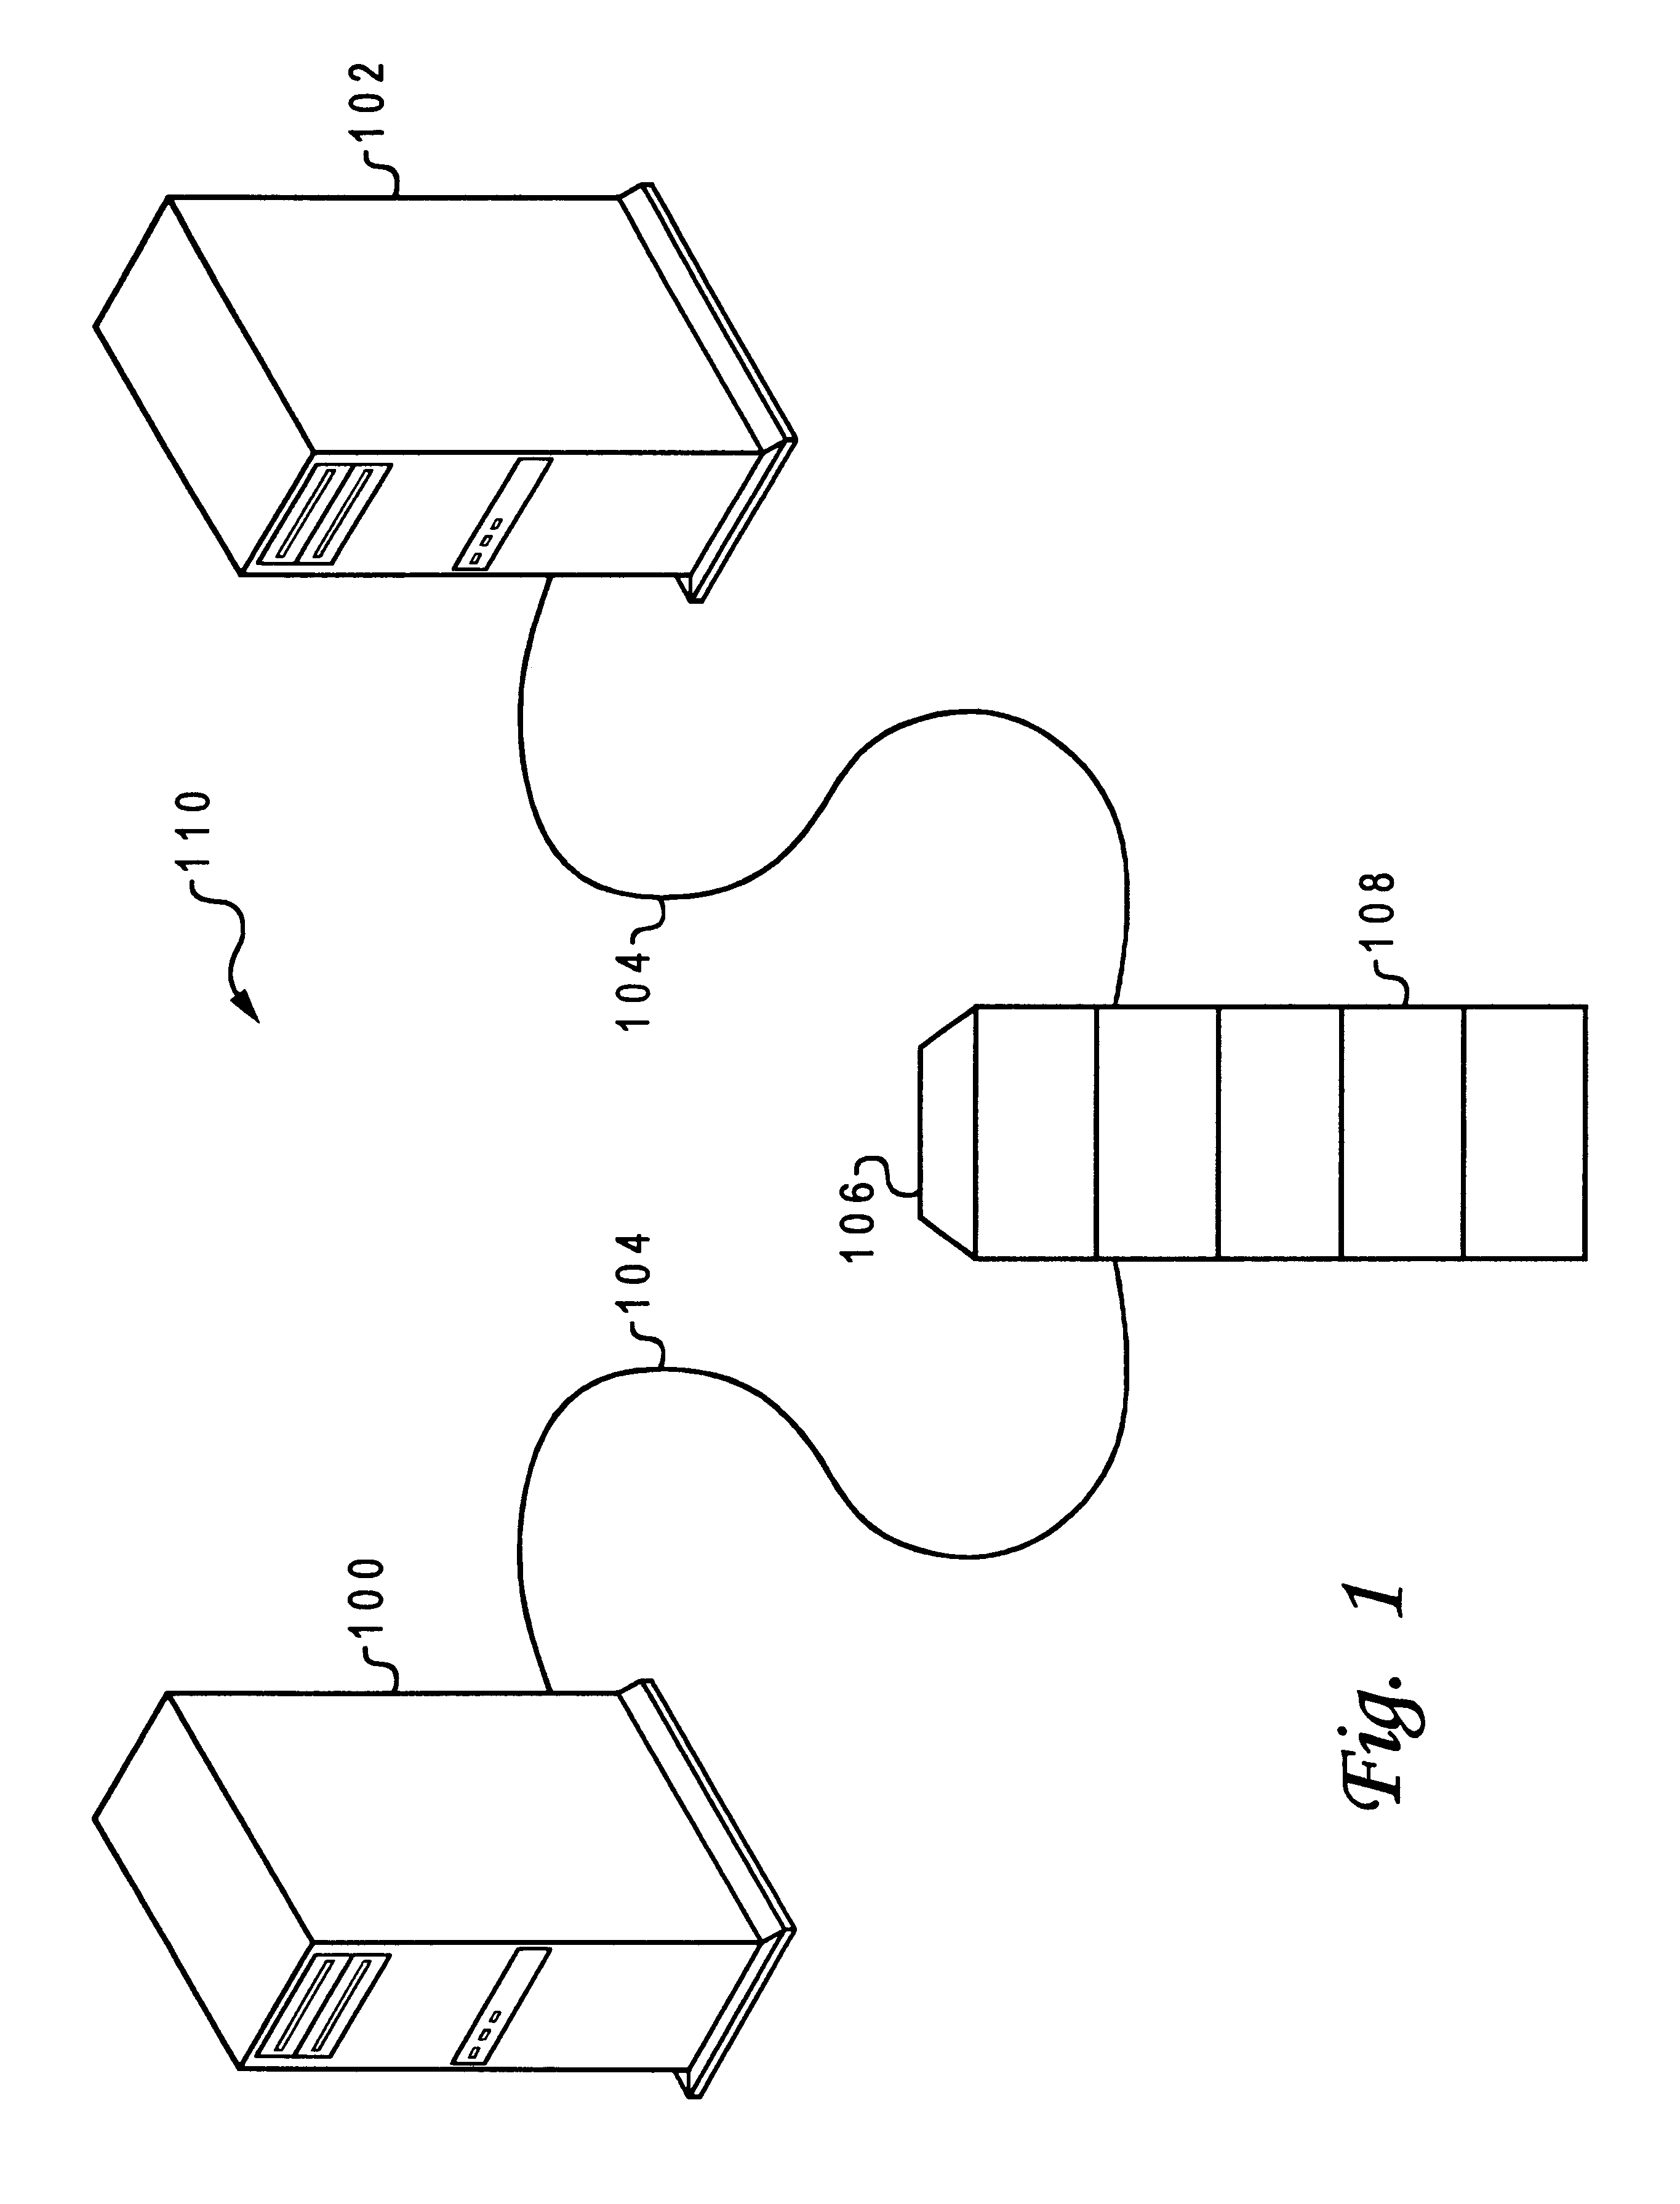 Separable in-line automatic terminator for use with a data processing system bus